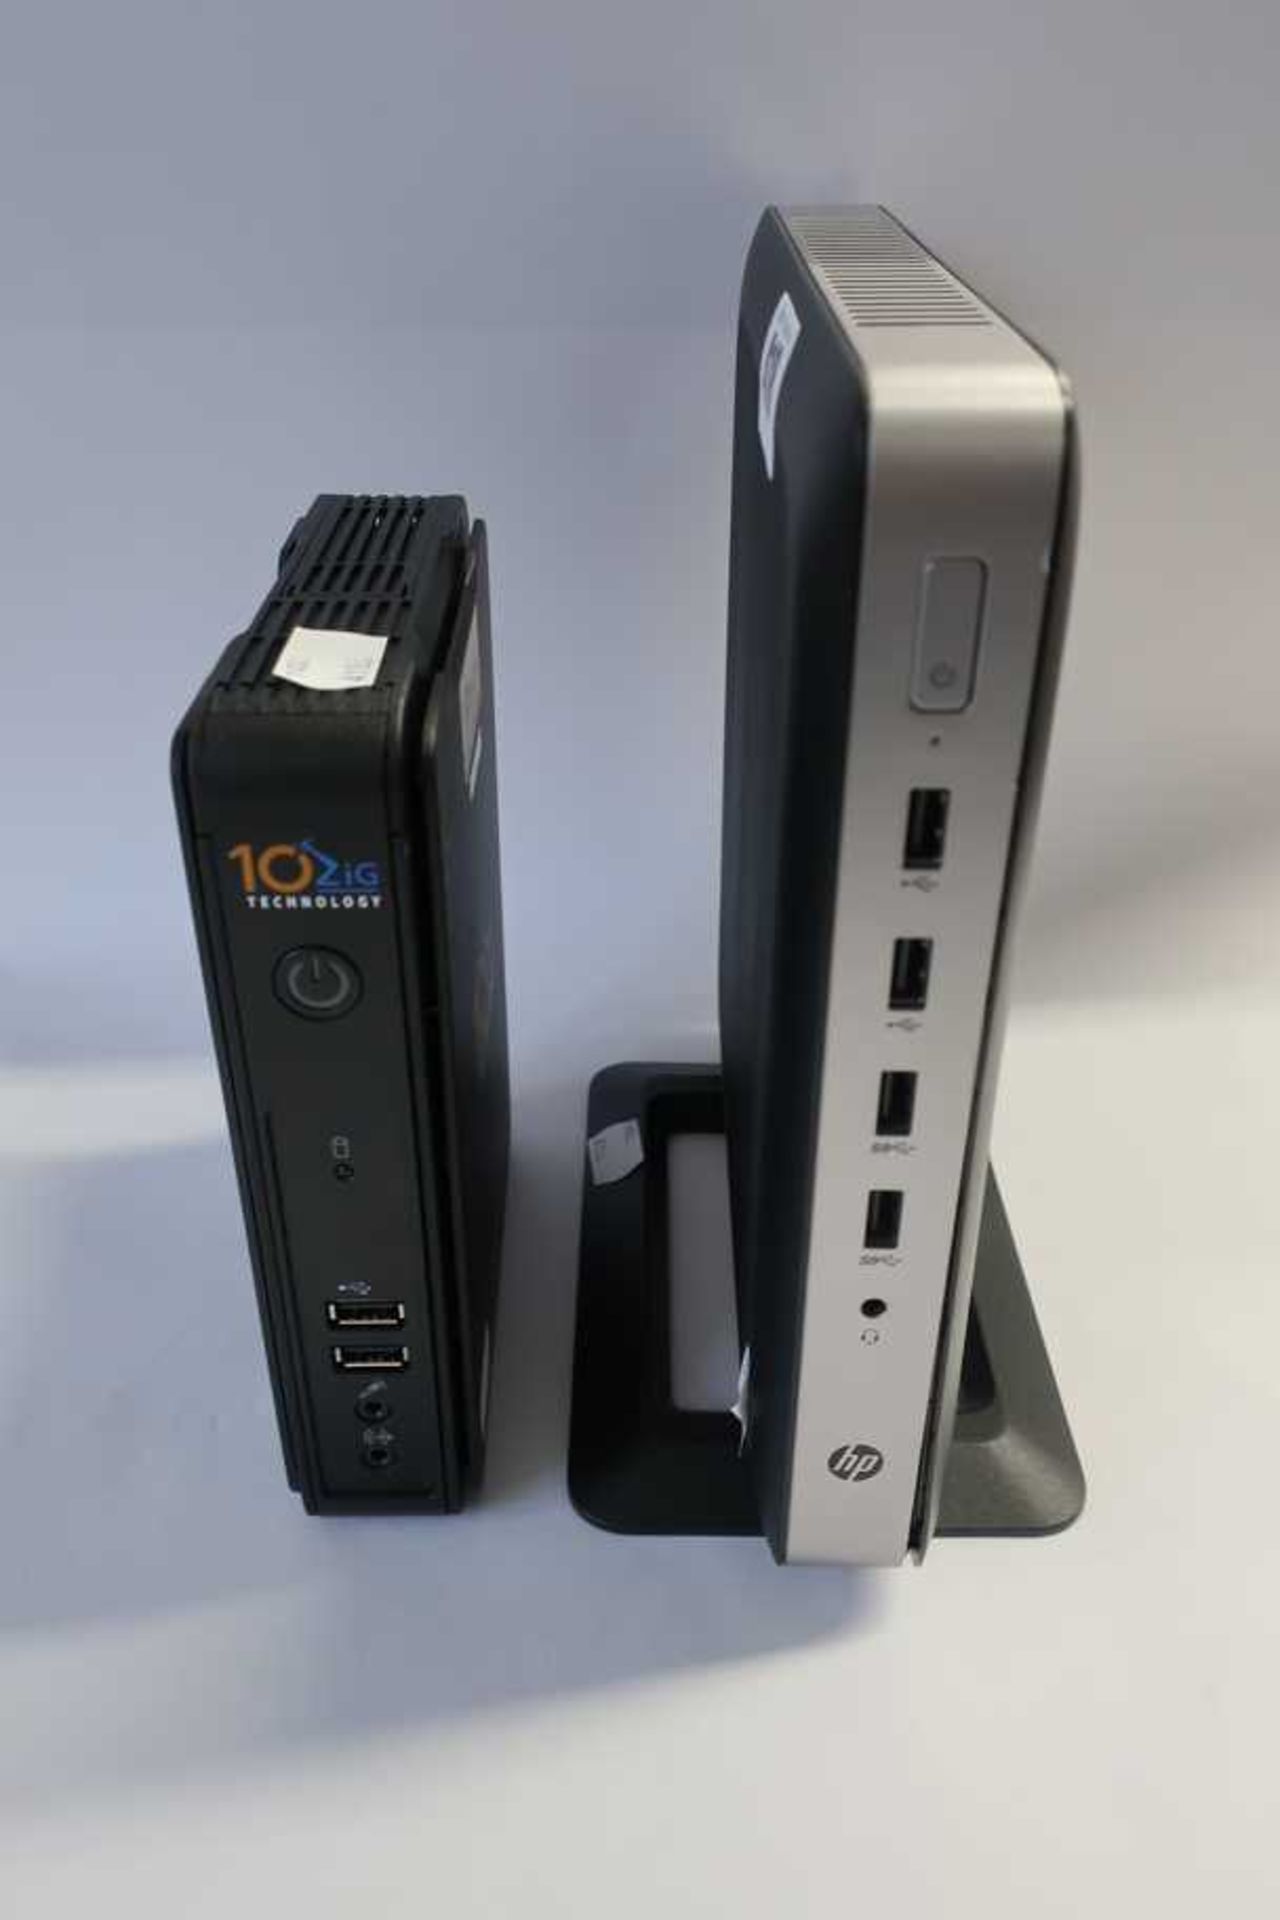 A pre-owned HP t630 Thin Client with power adaptor (Serial: 8CN83506V4) and a 10ZiG 5872q Thin